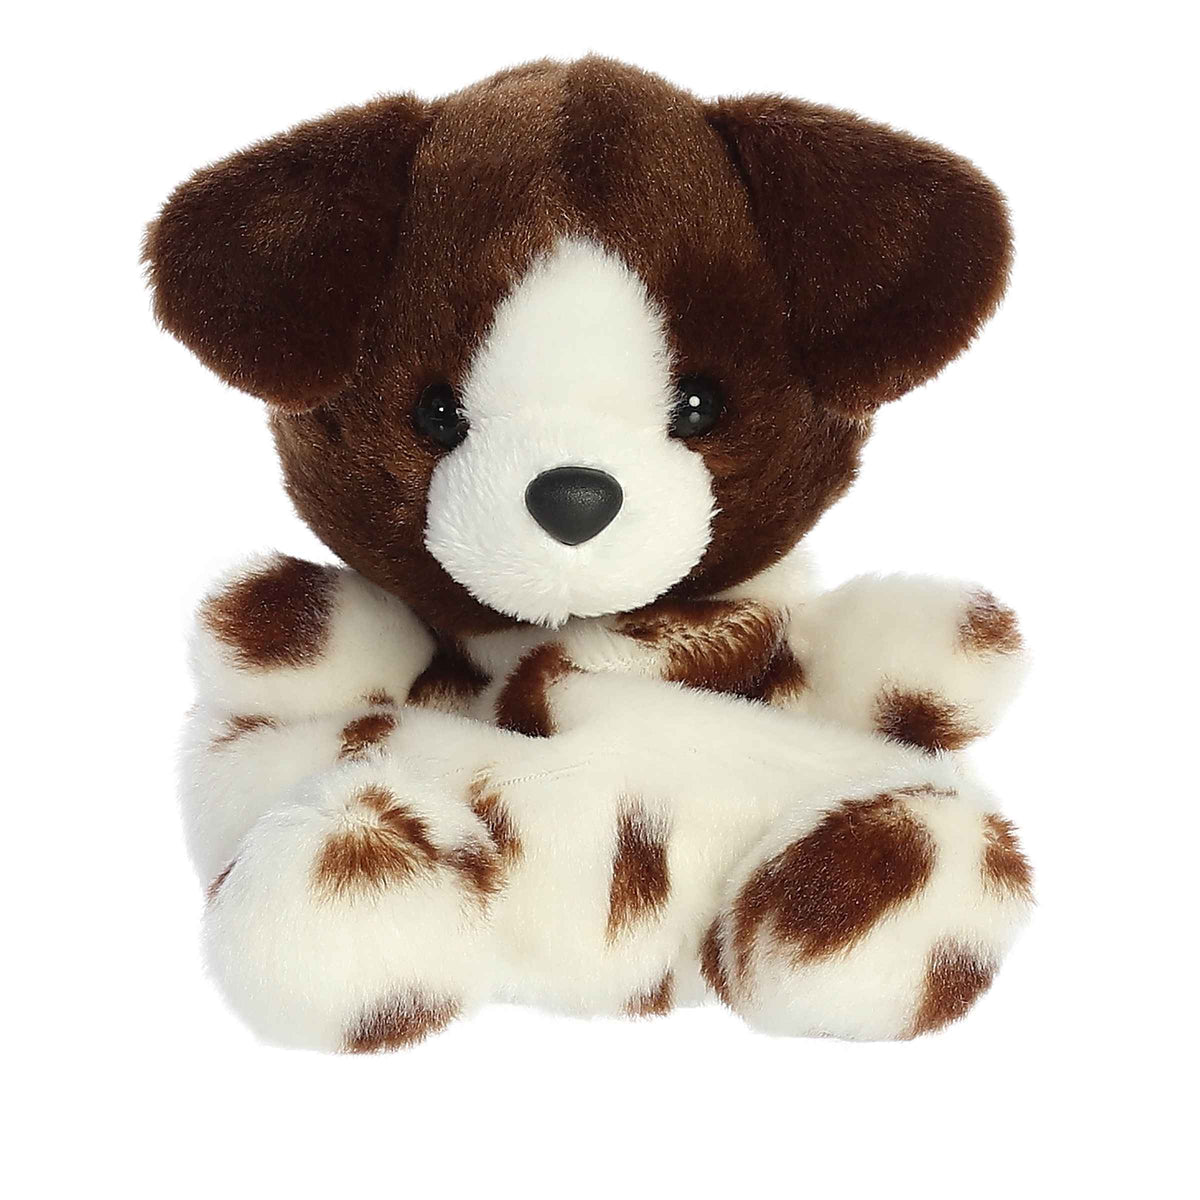 Freckles German Short Hair Pointer dog plush from Palm Pals, chocolate-brown patches, ready for action